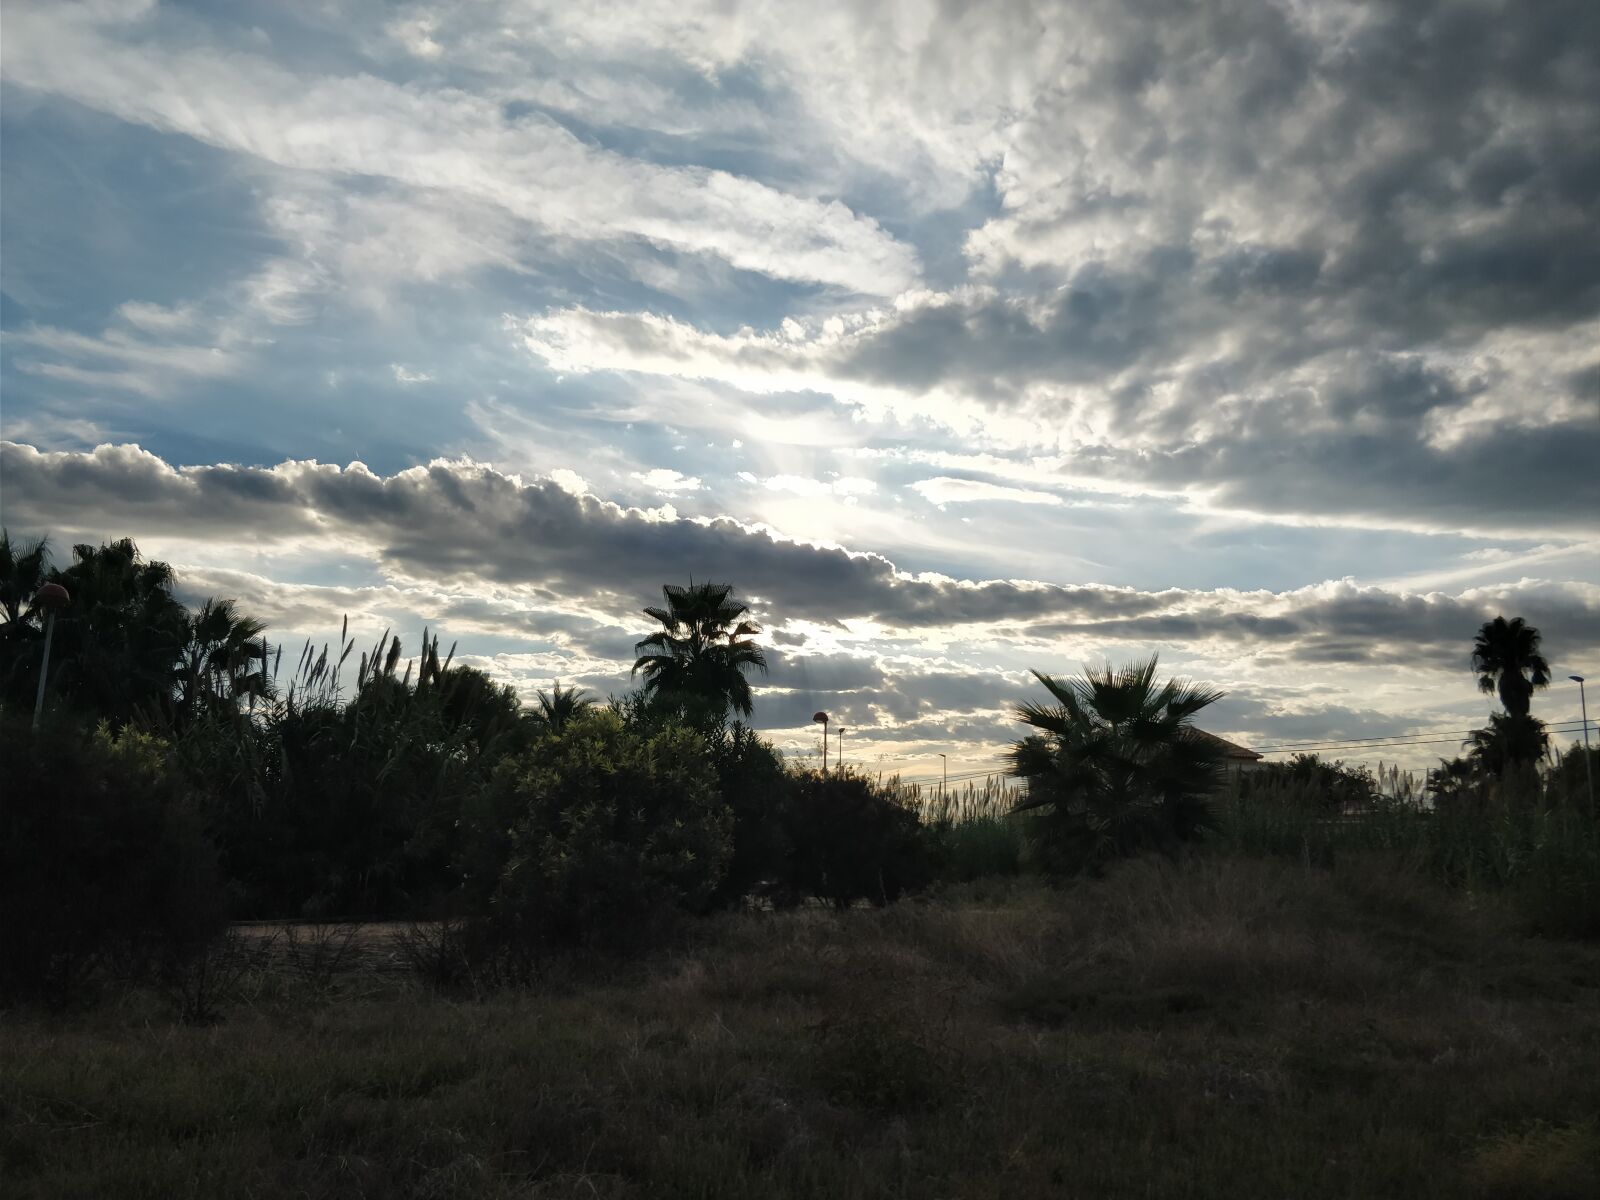 OnePlus 5 sample photo. Air, burriana, castellon, clouds photography